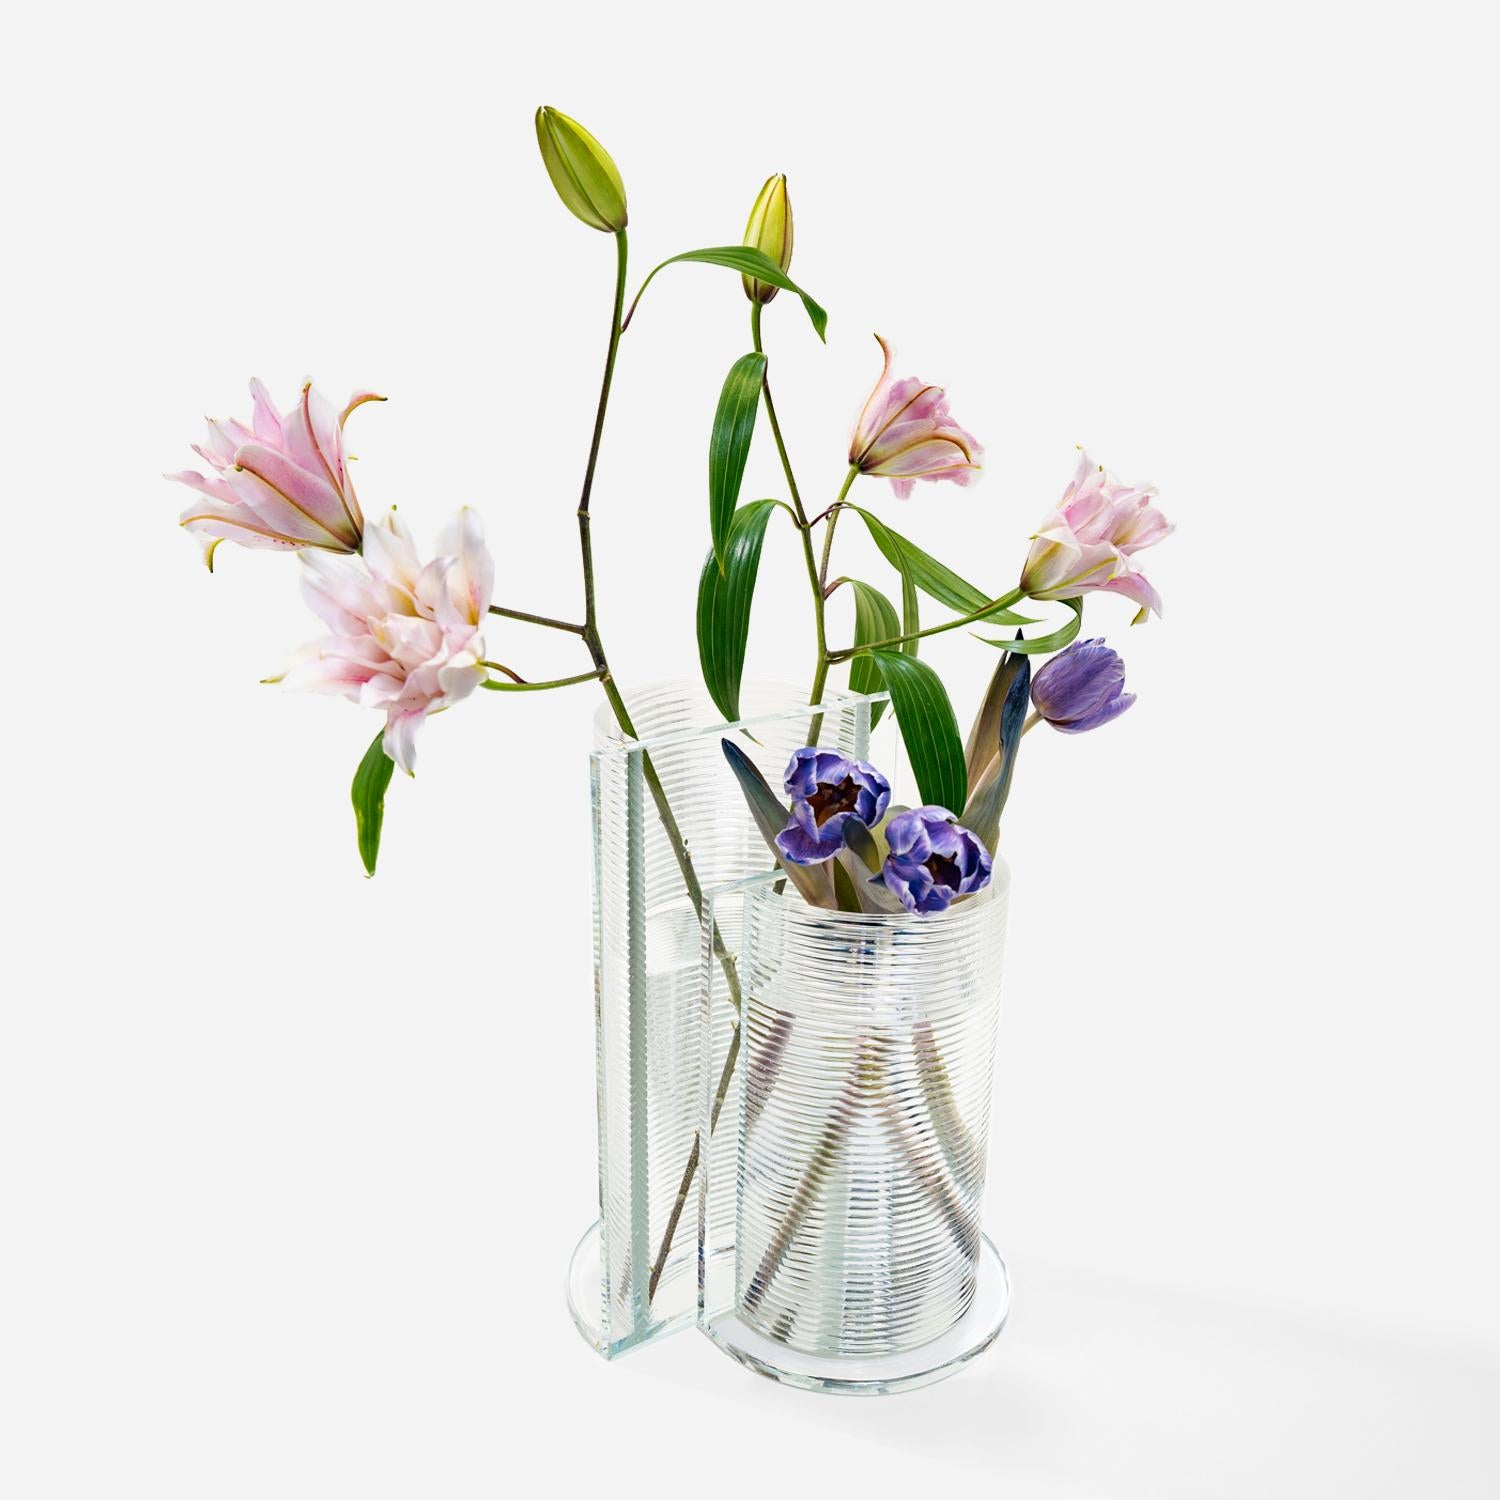 Made using Evenline's one-of-a-kind molten glass 3D printer, Bisect is a unique and recognizable silhouette to brighten up your home and bring your favorite flowers to life. Bisect is designed to be able to shine as a single vase, but also pairs